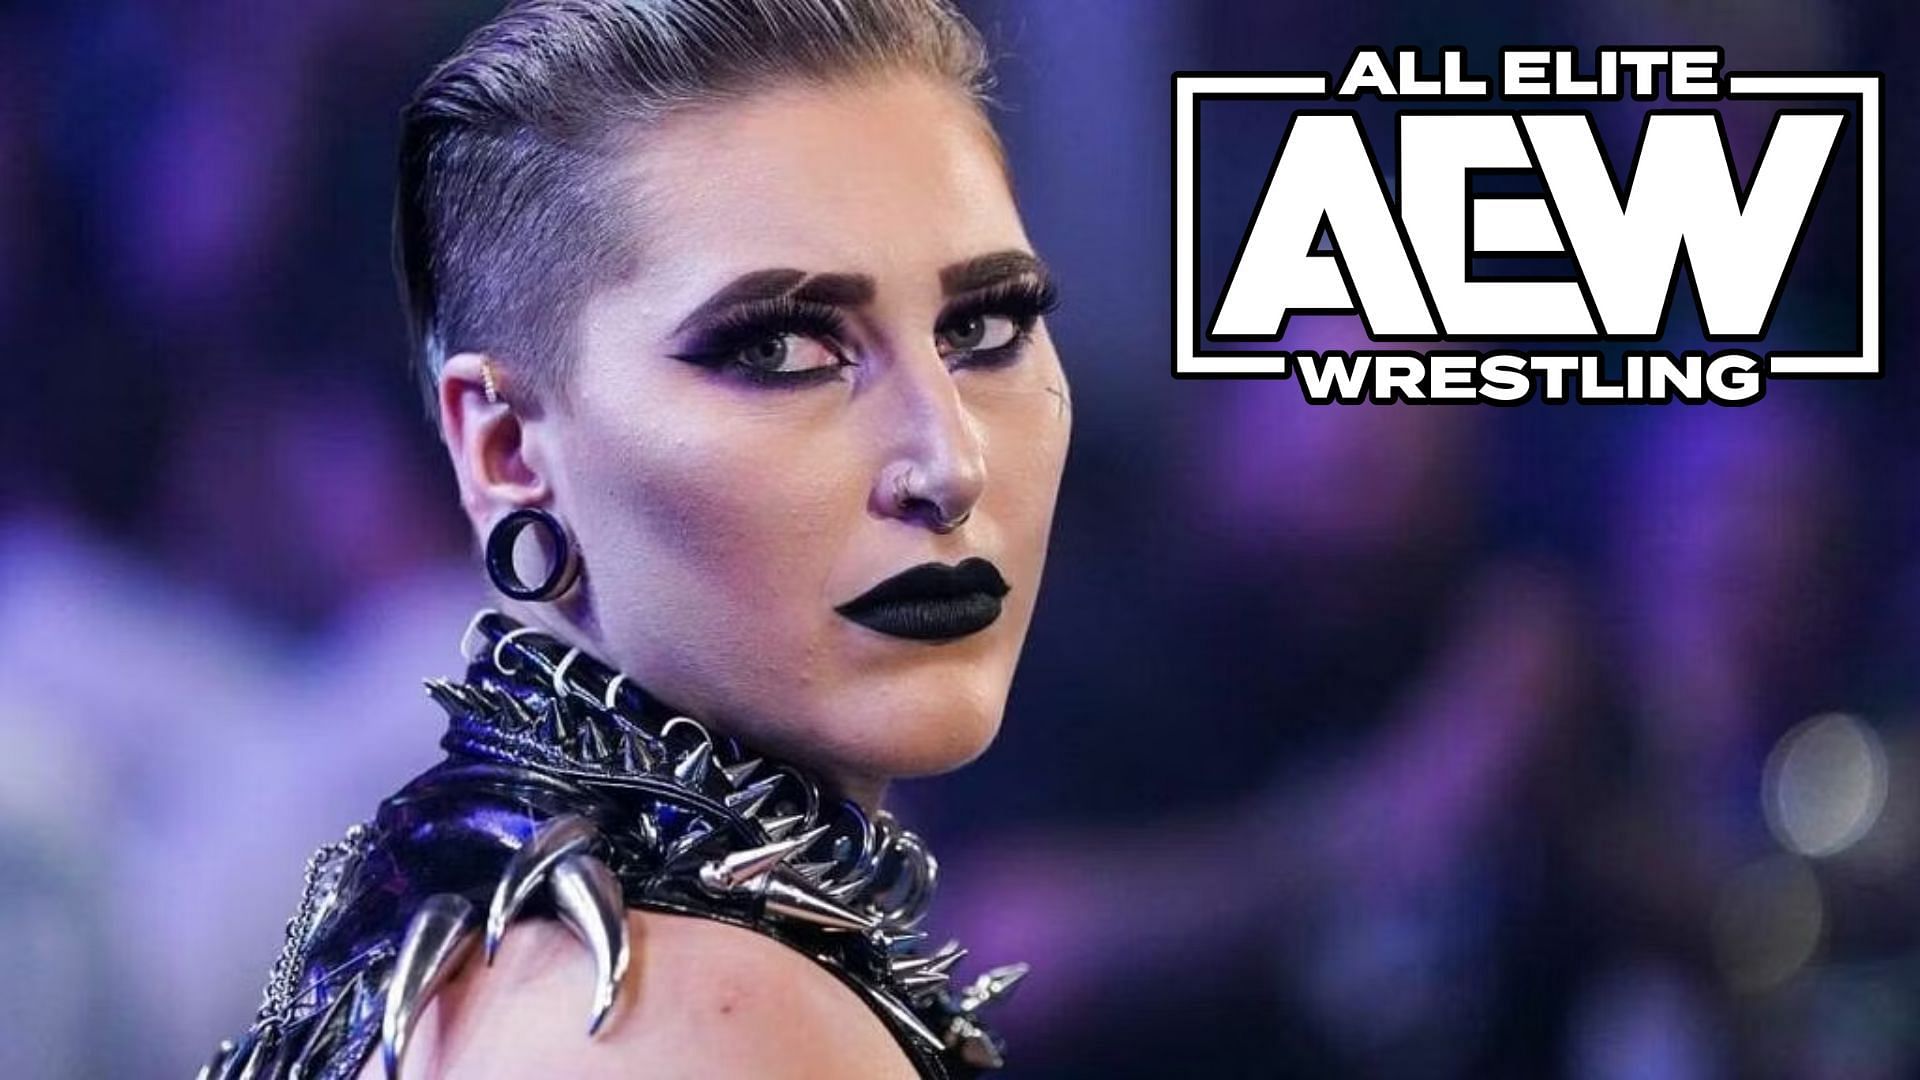 Could Rhea Ripley still use some more in-ring experience?